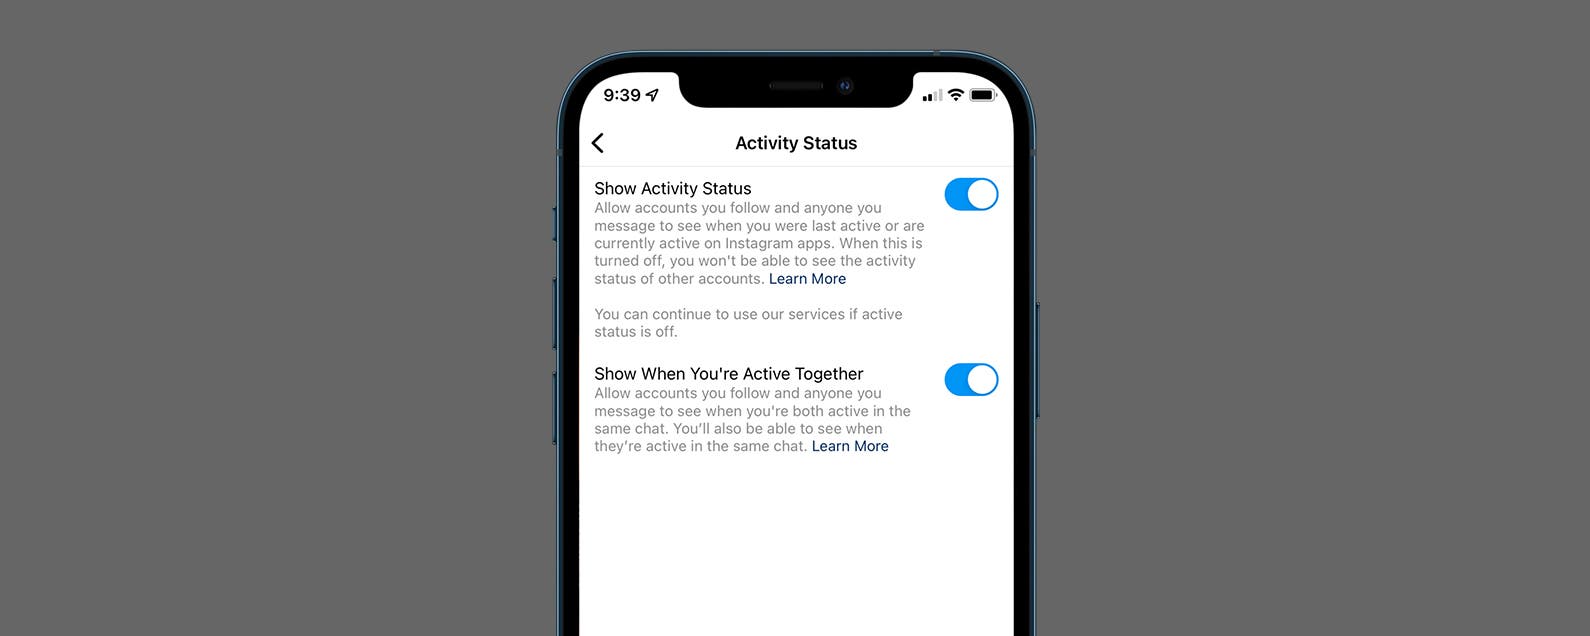 How to Turn Off Active Status on Instagram on Your iPhone